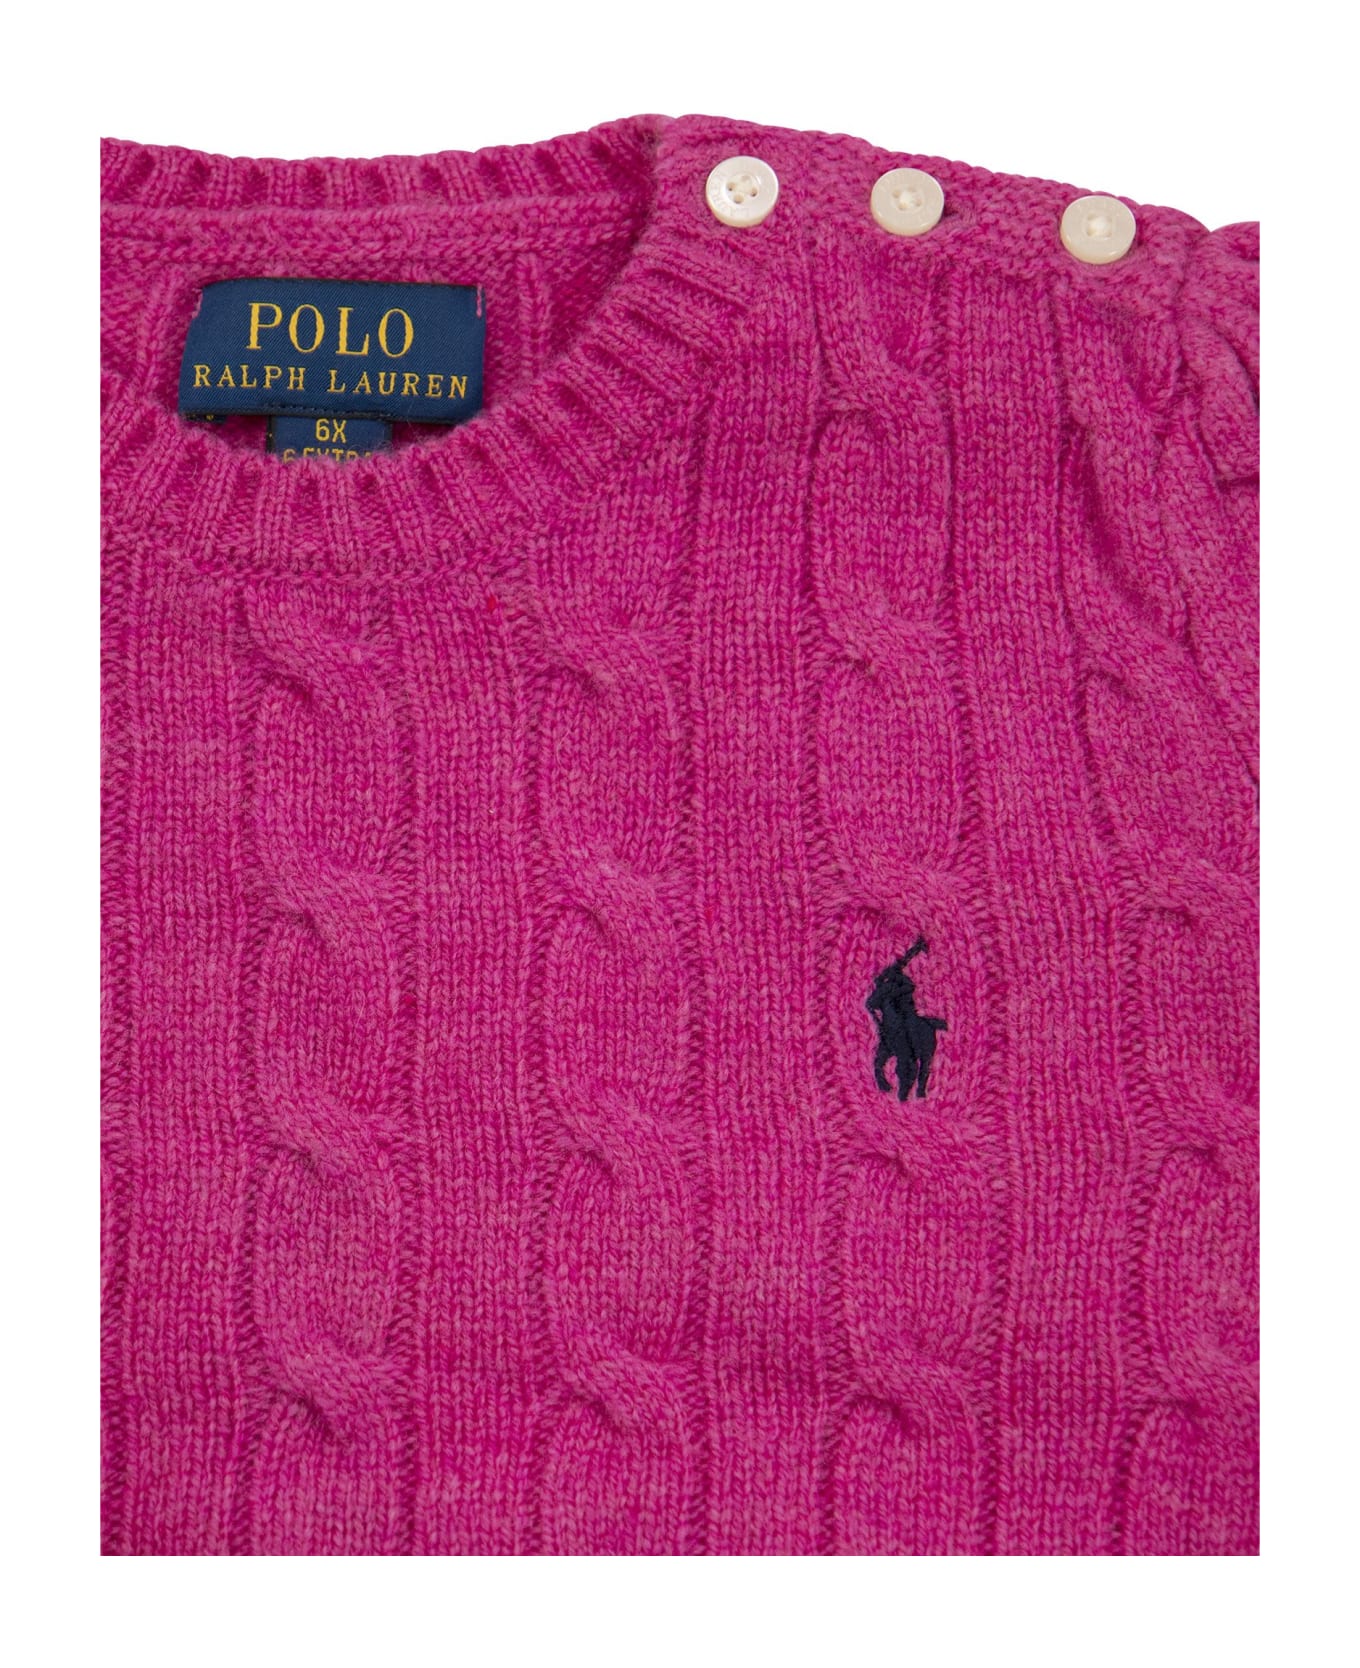 Polo Ralph Lauren Wool And Cashmere Cable-knit Sweater - Fuchsia